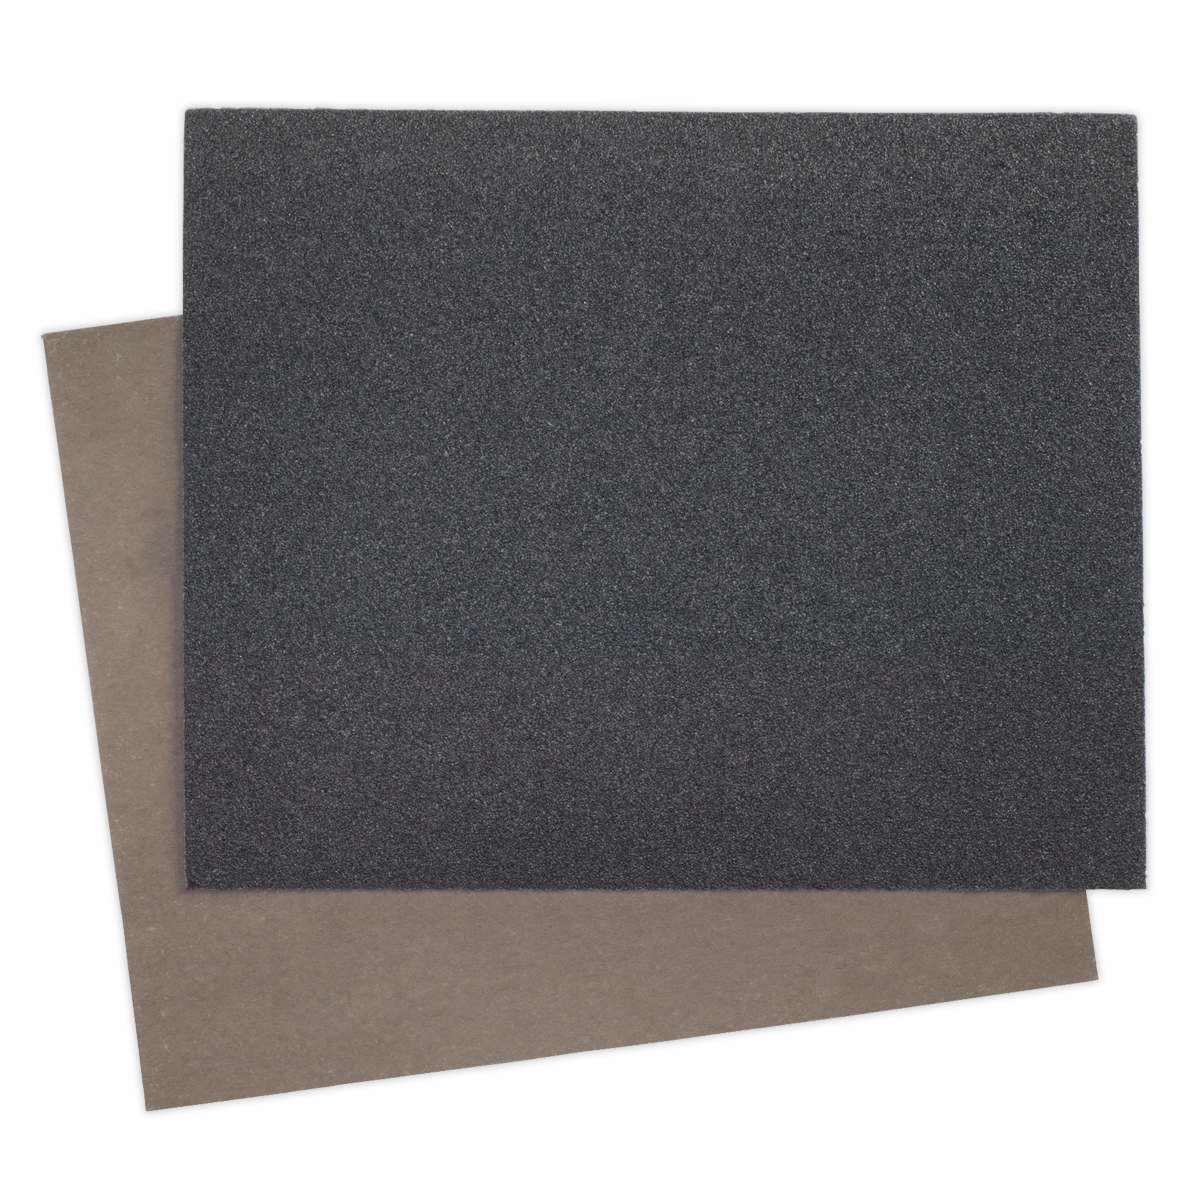 Wet & Dry Paper 230 x 280mm 240Grit Pack of 25 - WD2328240 - Farming Parts